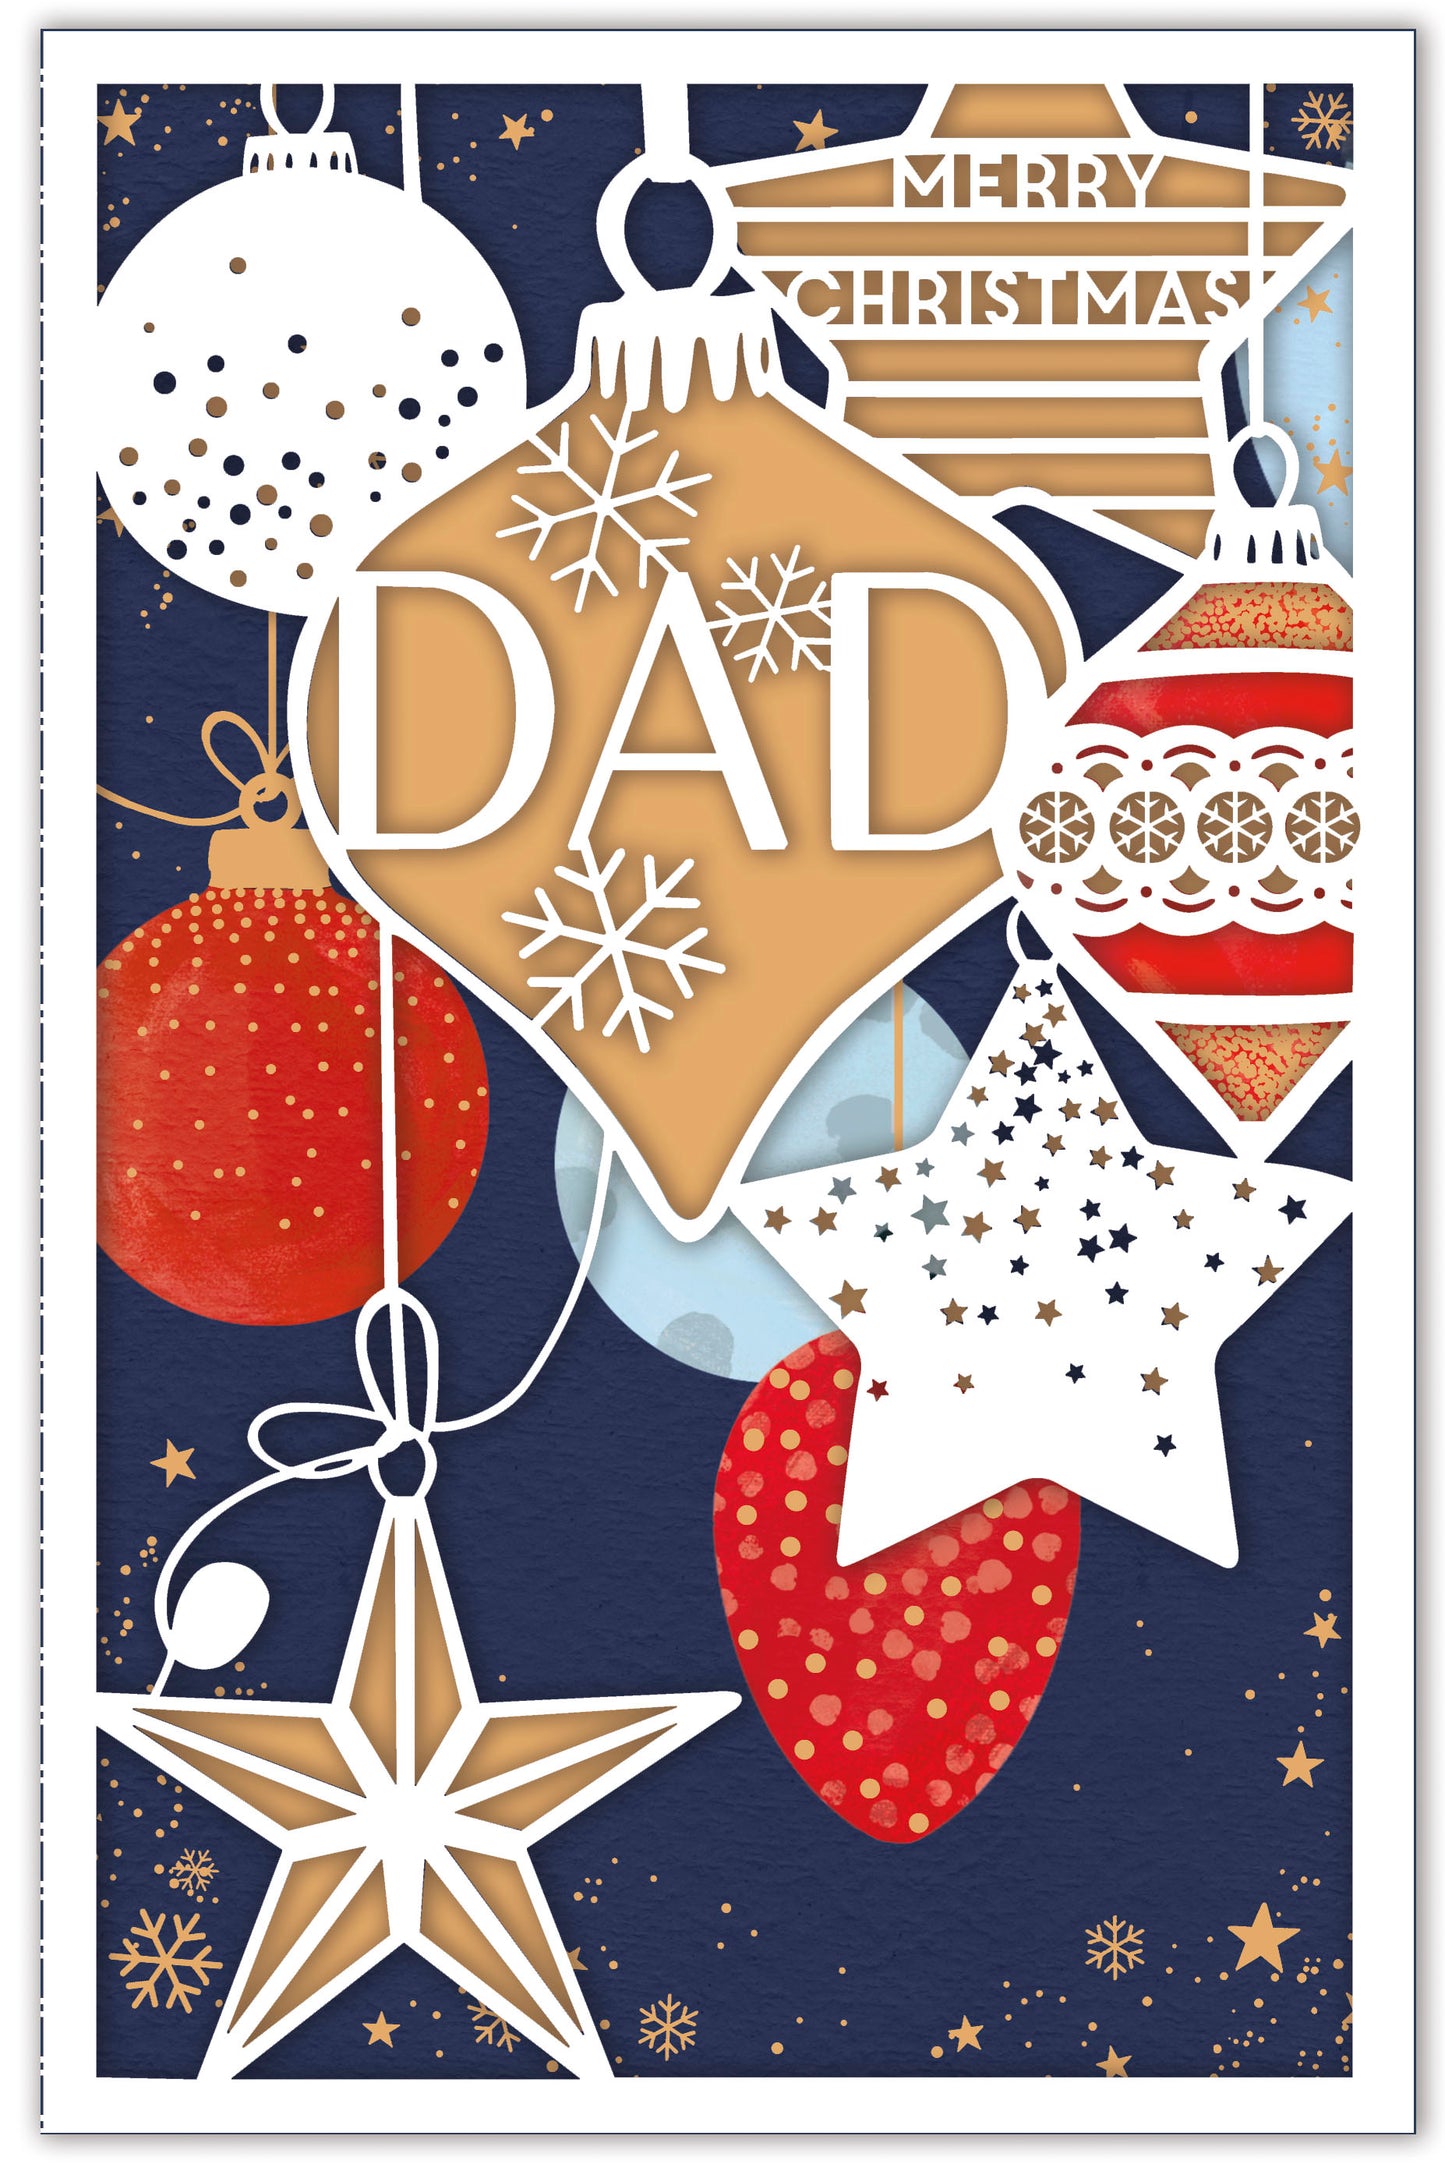 Merry Christmas Dad 3D Cut Out Gold Foiled Christmas Card